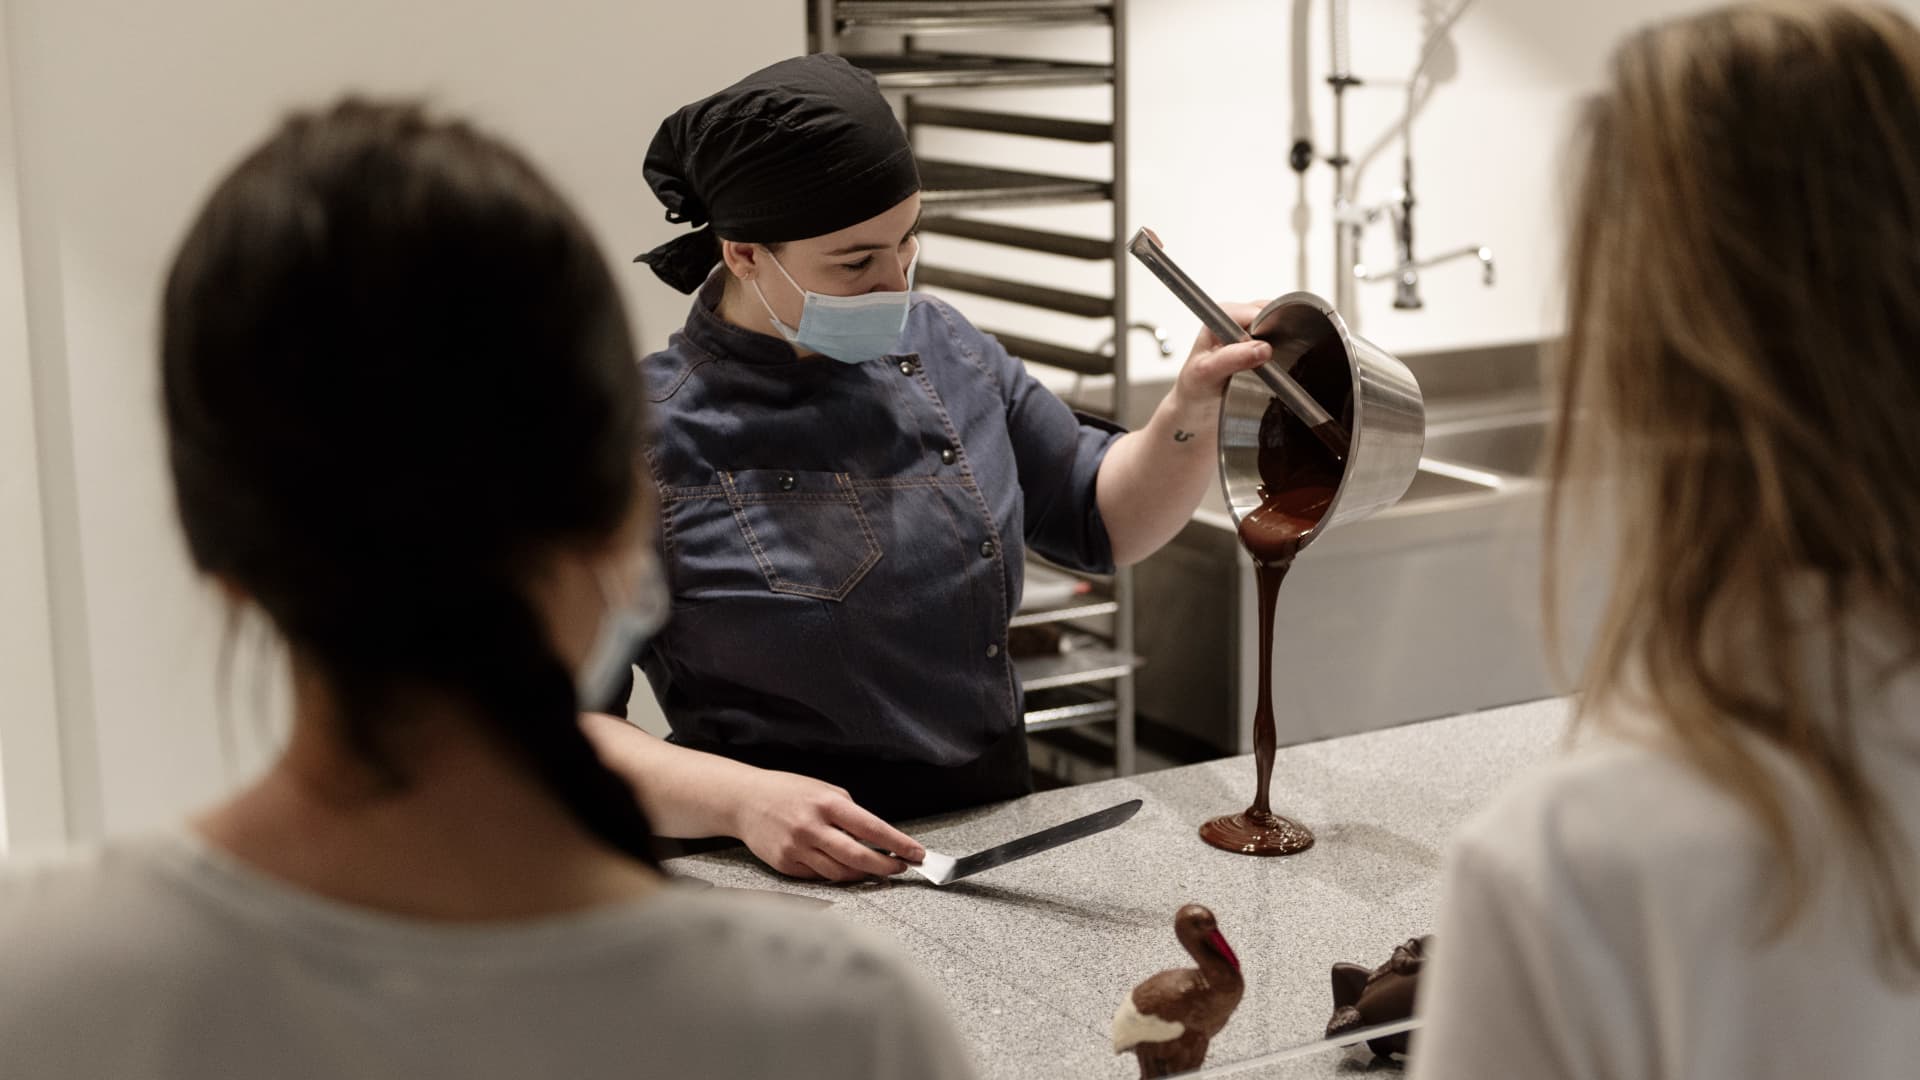 Guests watch as chocolate is poured at the Musée du Chocolat in Strasbourg, France.